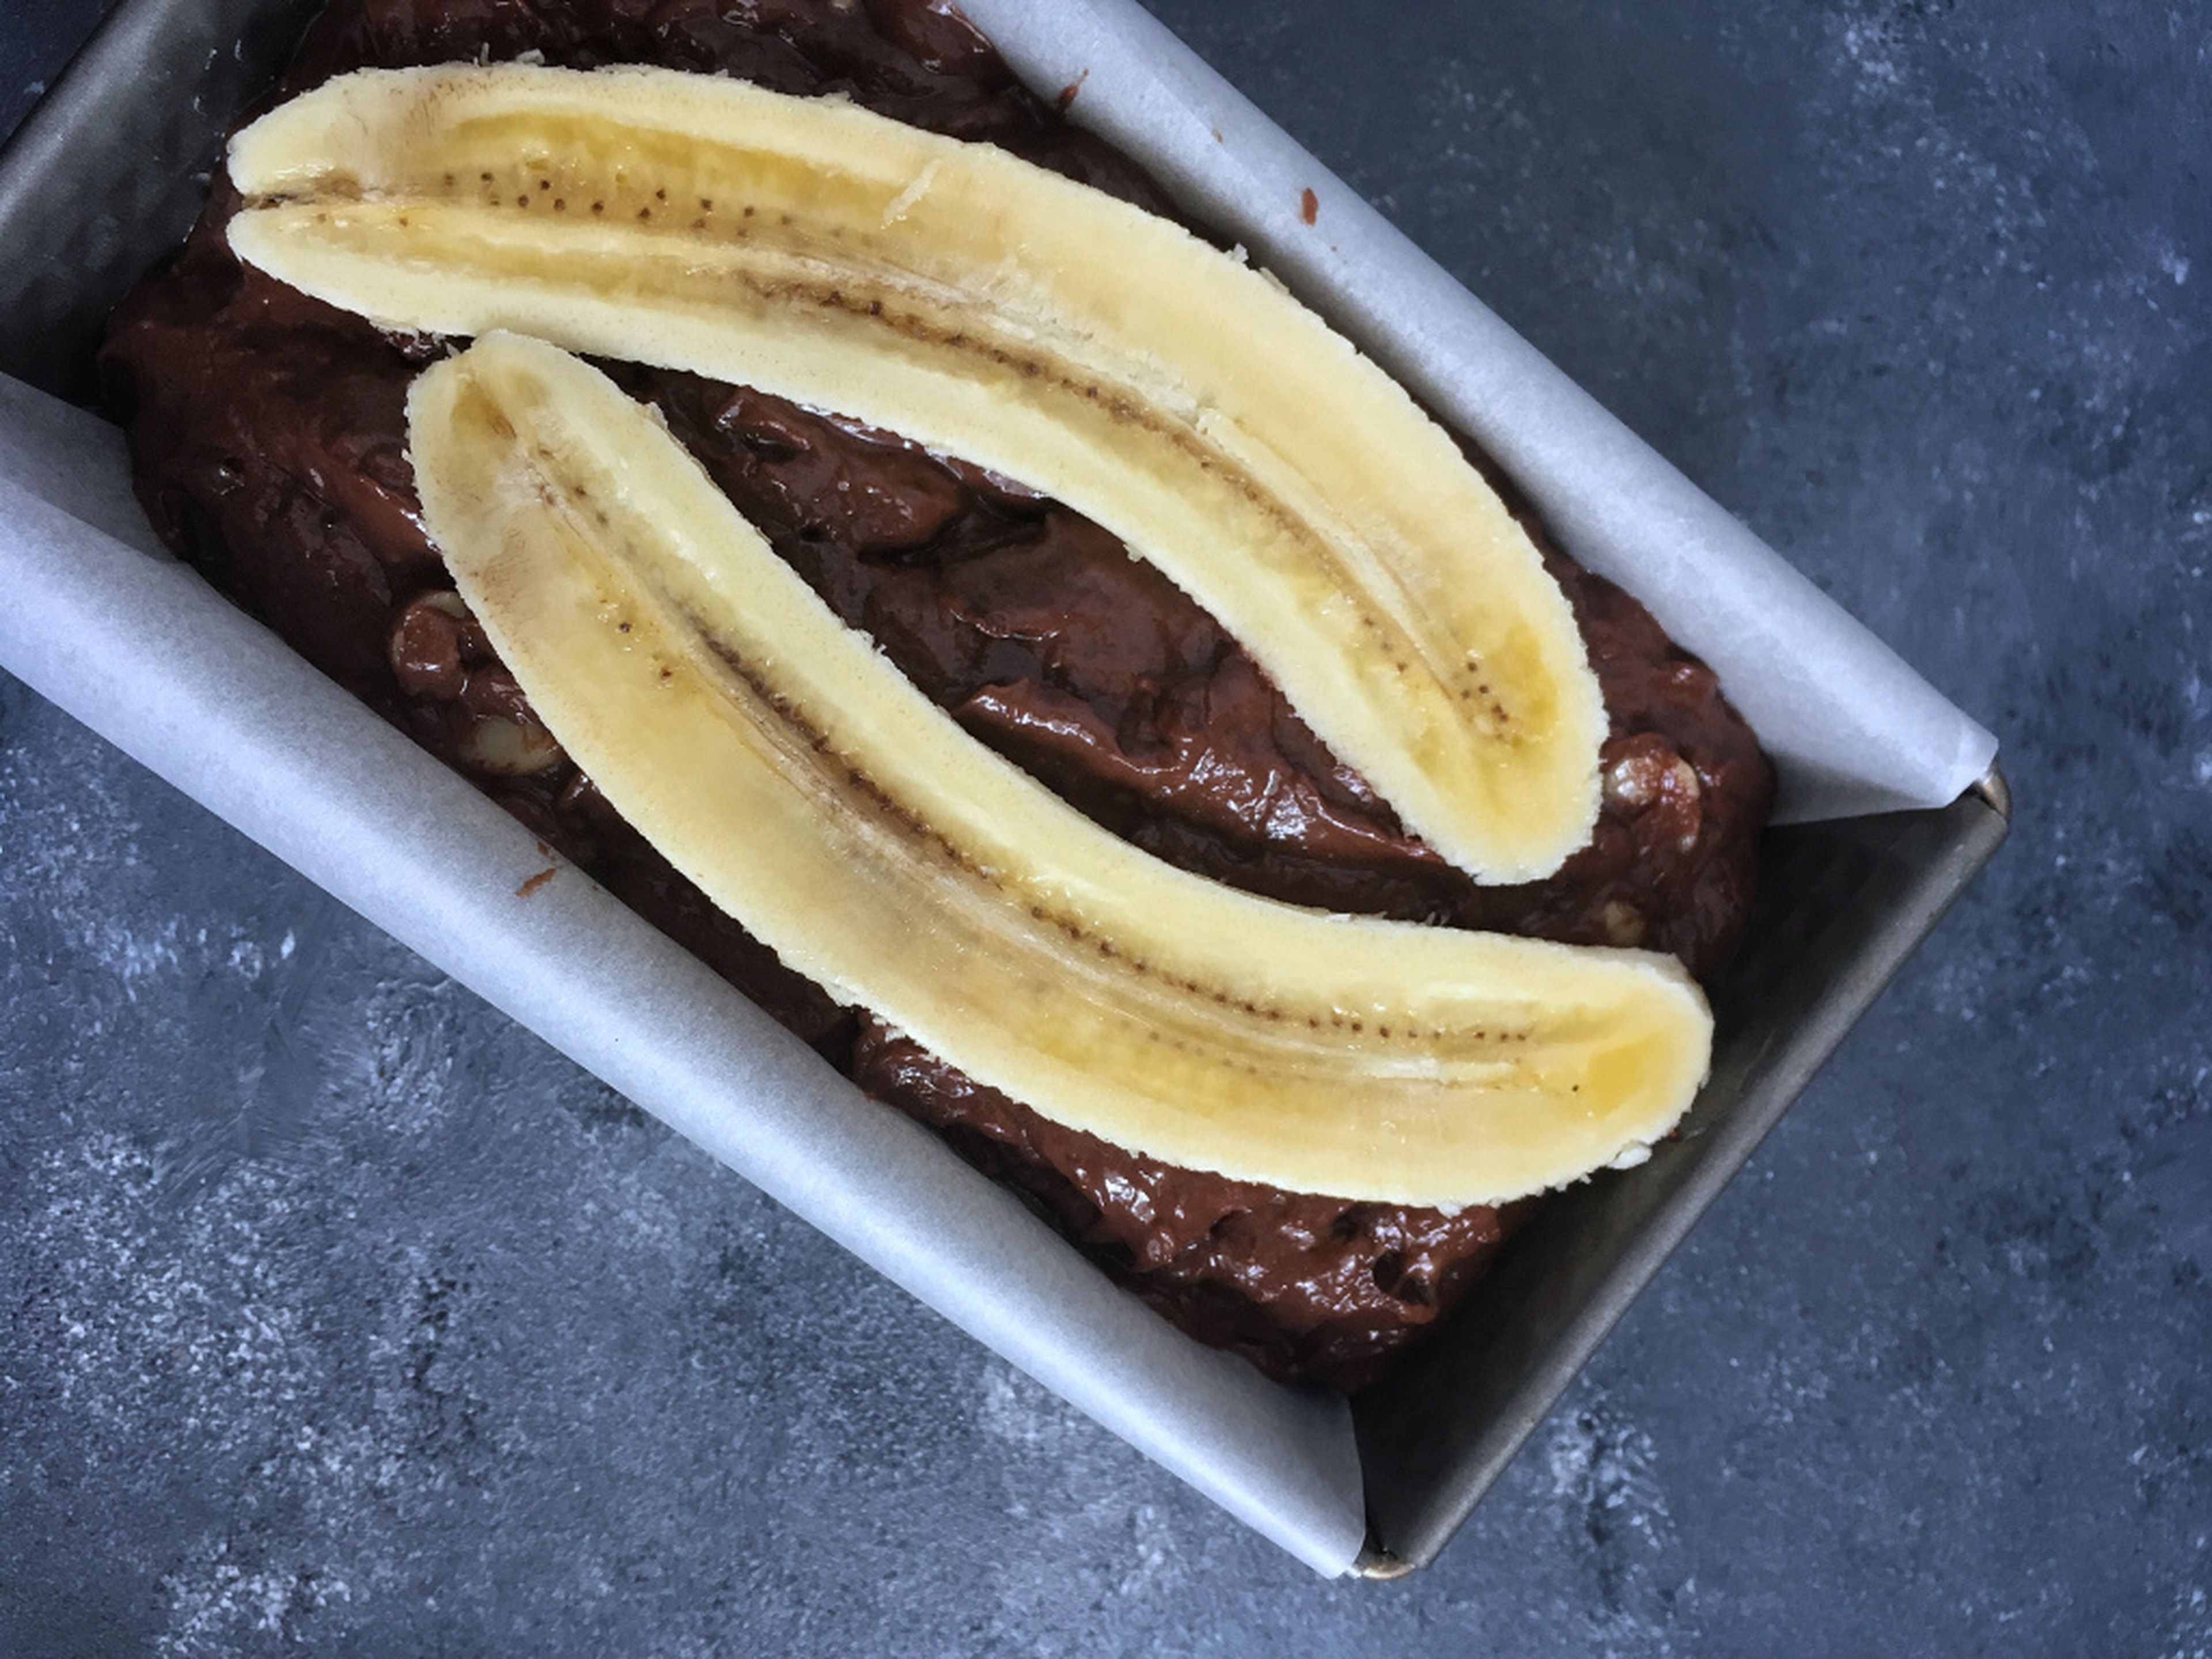 Fill the loaf pan with the batter. For decoration, slice the leftover banana lengthwise, arrange on top of the batter, and sprinkle some brown sugar over it to caramelize.